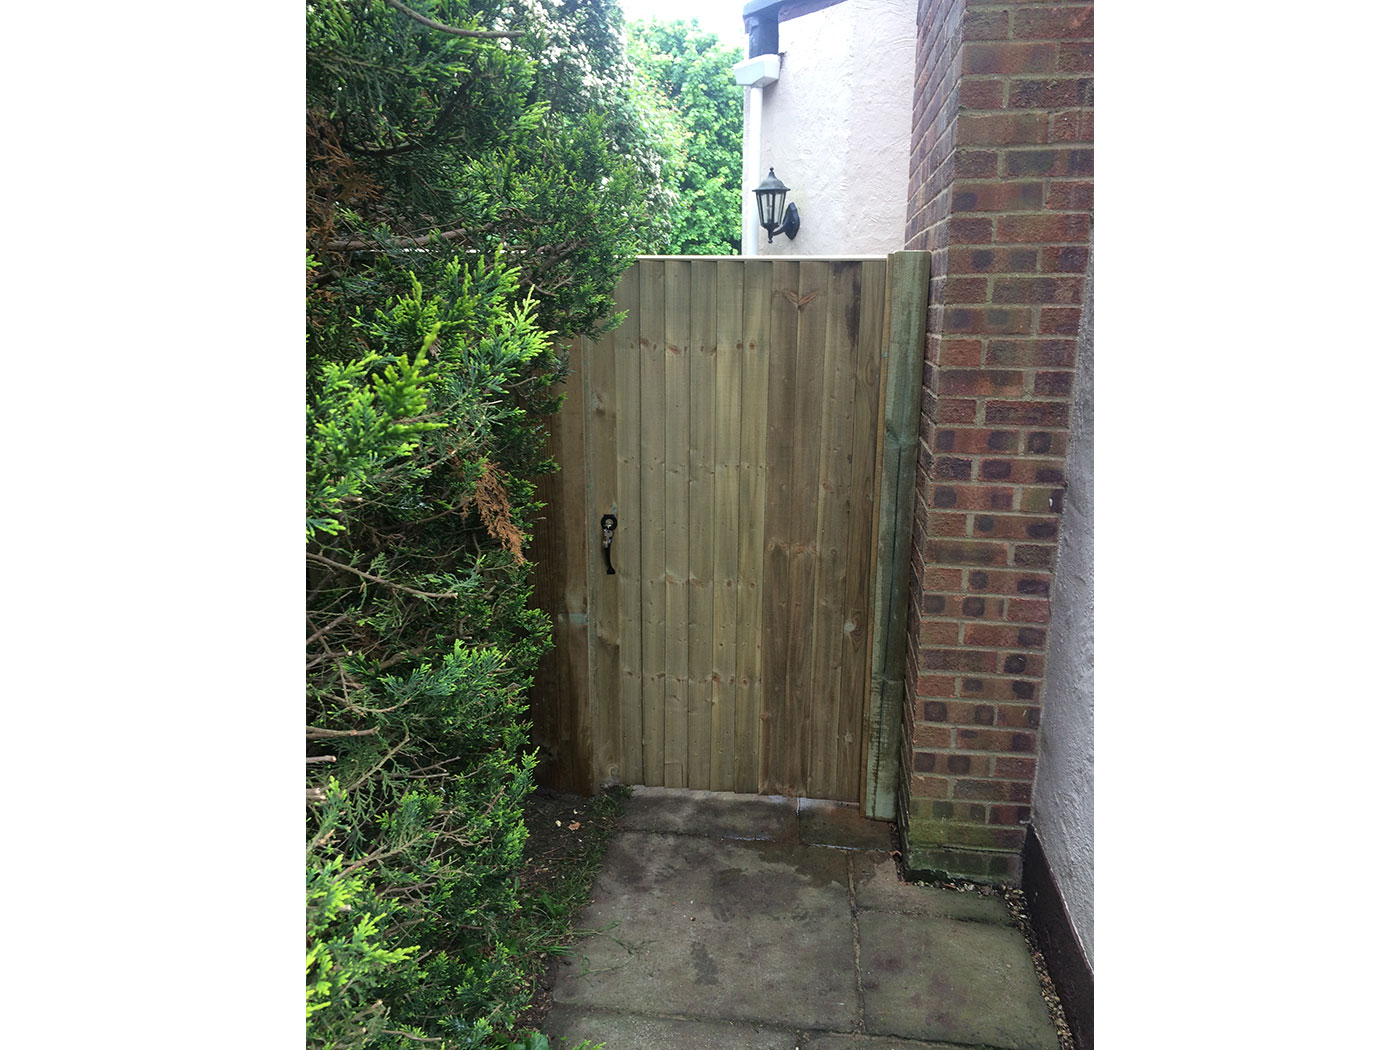 Closed board gate by Vincent Fencing